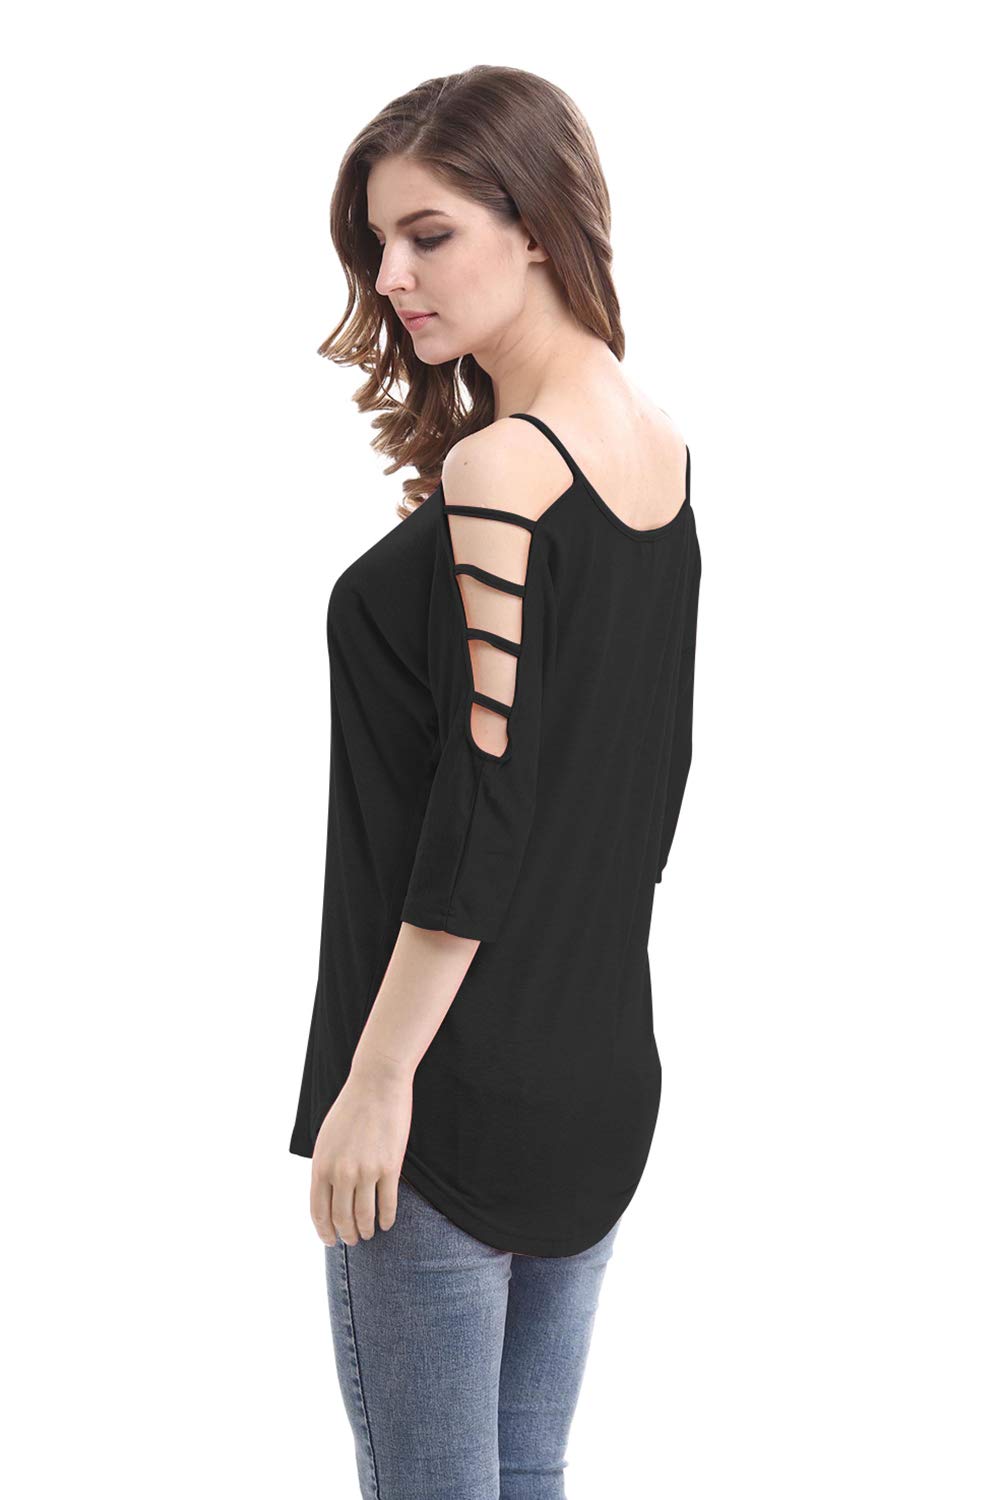 MOONCOLOUR Women's Casual Loose Hollowed Out Shoulder 3/4 Sleeve Shirts Tops